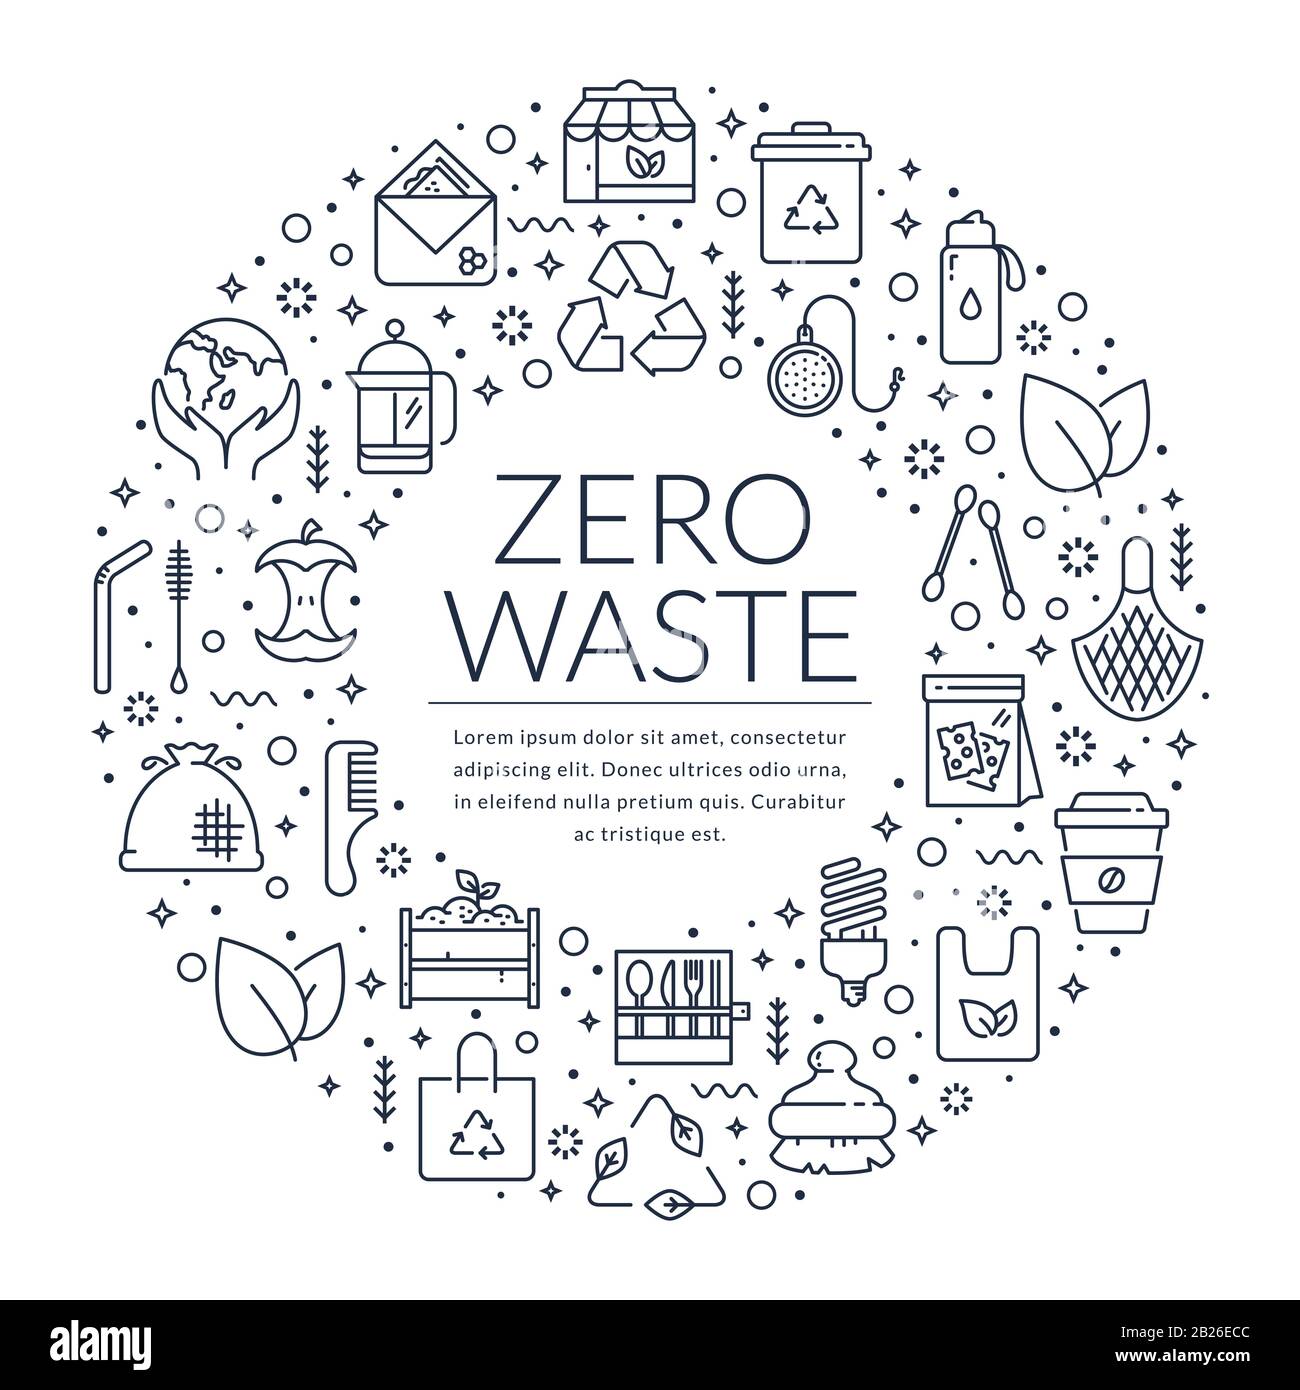 Zero waste banner with line icons and place for text. Template for recycling, reusable items, save the Planet and eco lifestyle themes. Stock Vector